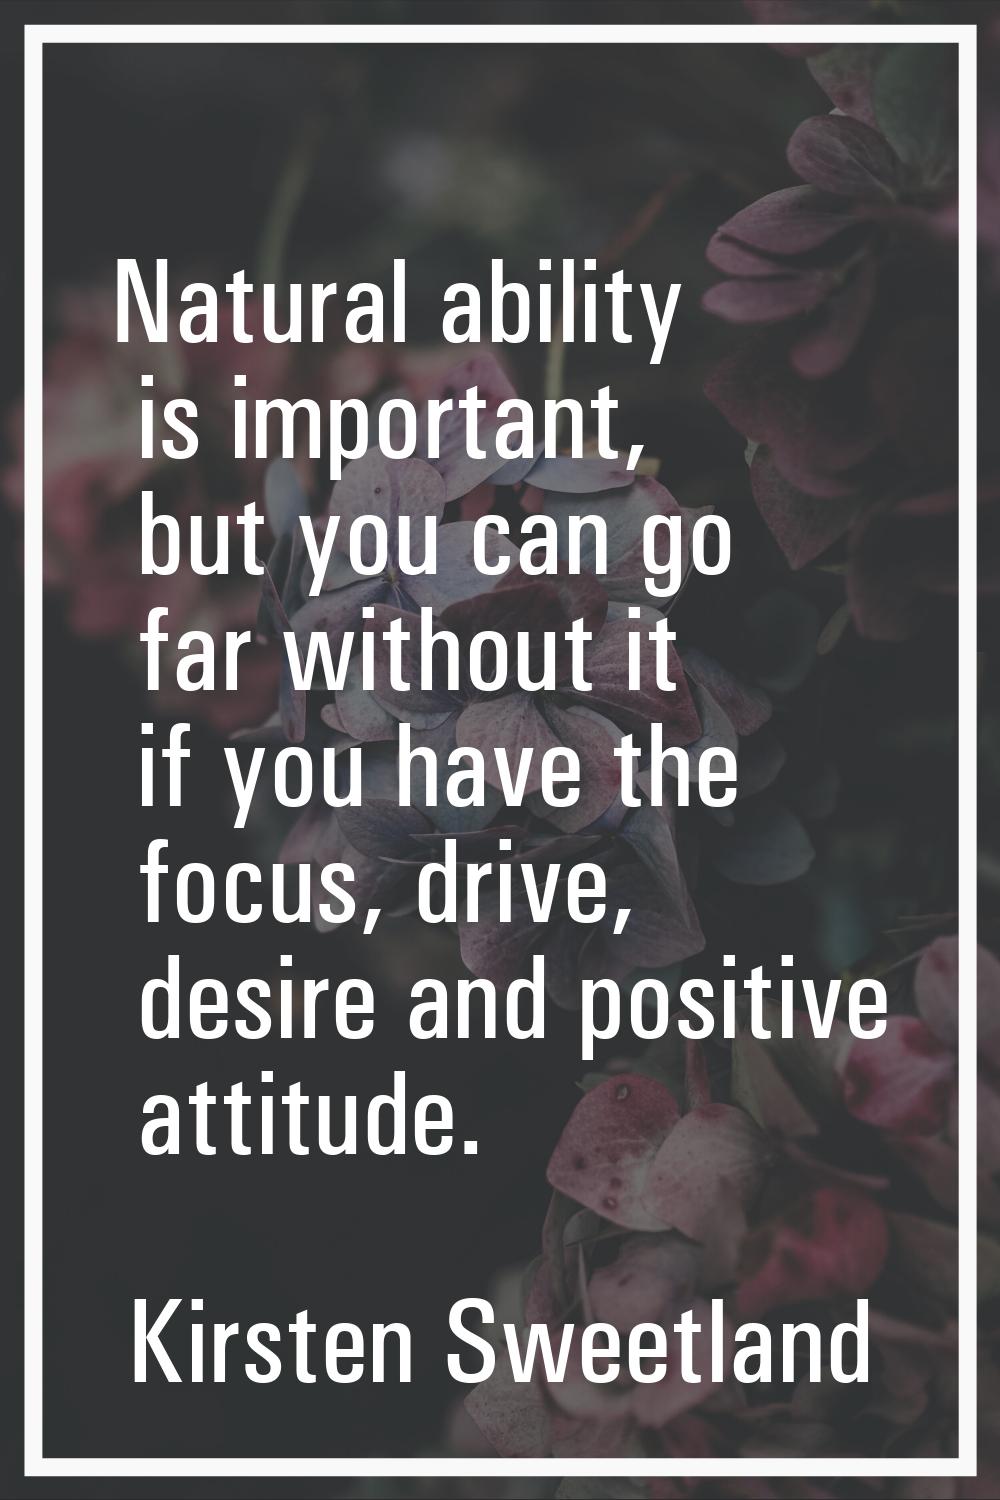 Natural ability is important, but you can go far without it if you have the focus, drive, desire an